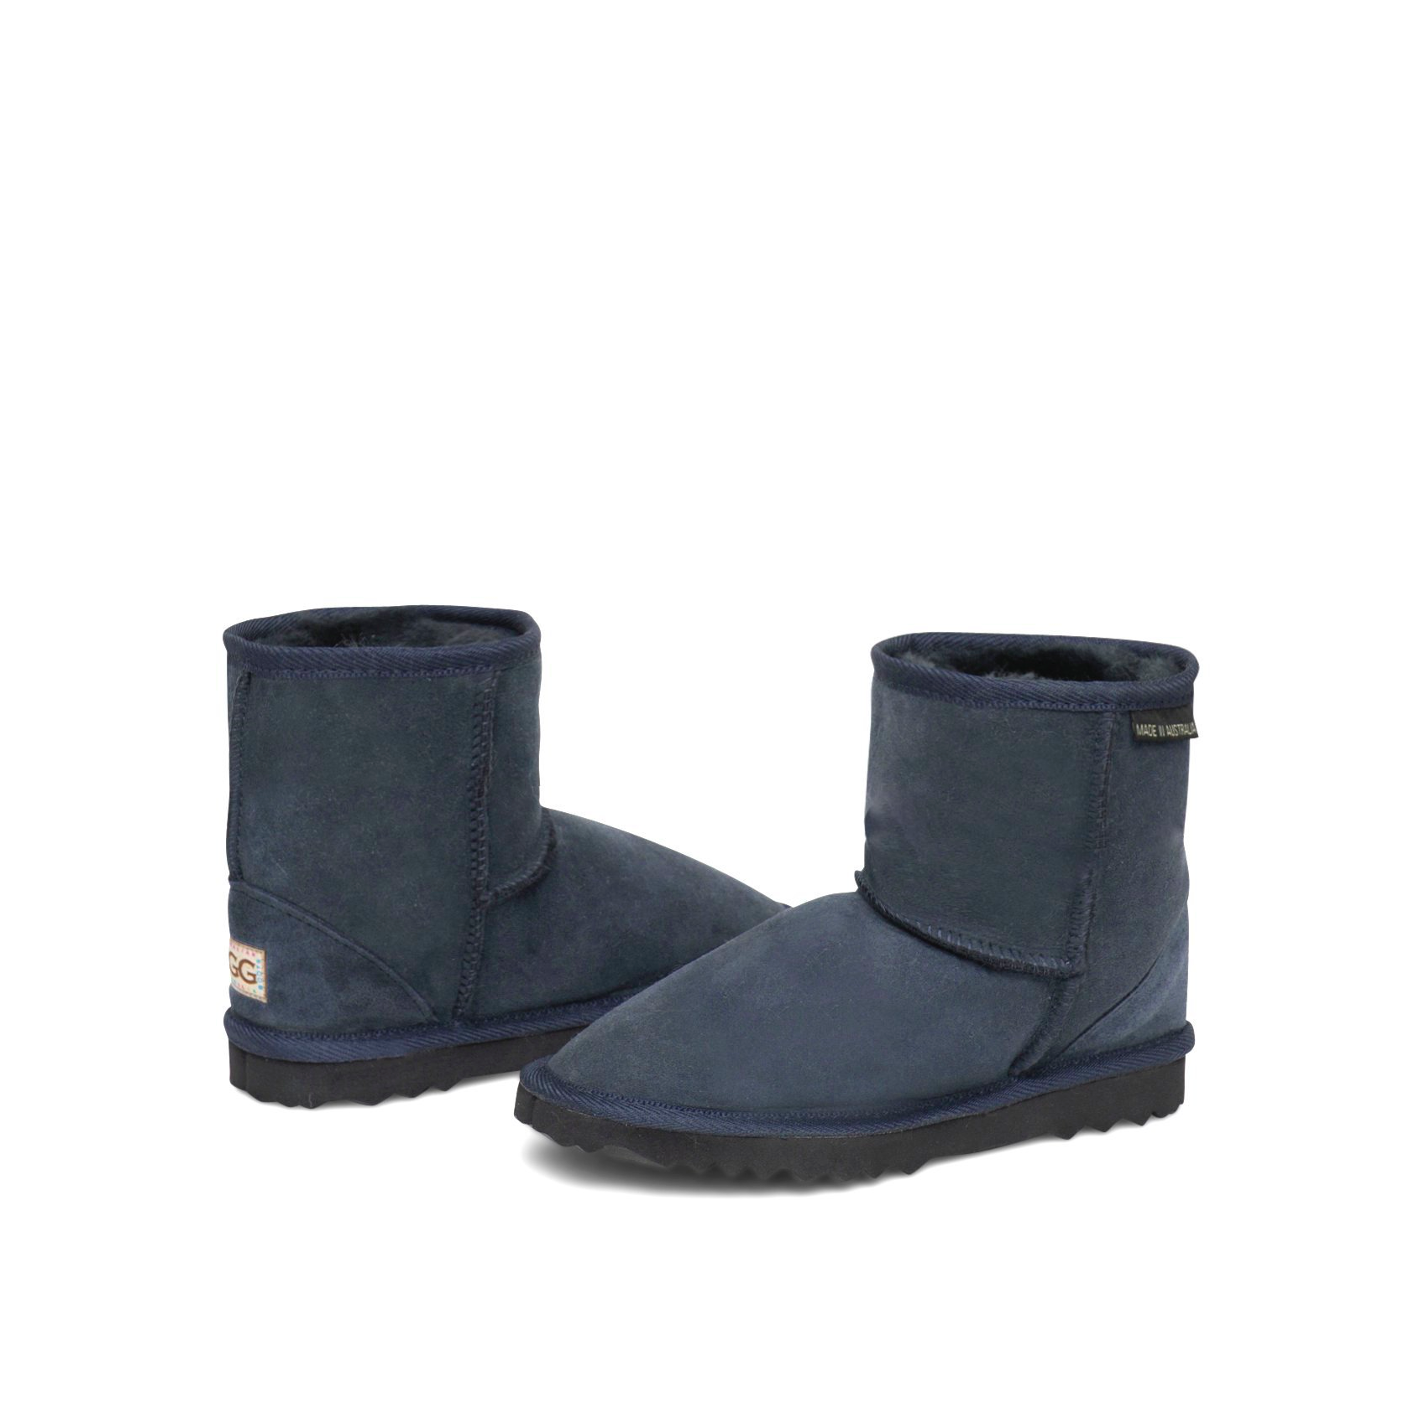 Kid's ultra short boots in navy blue